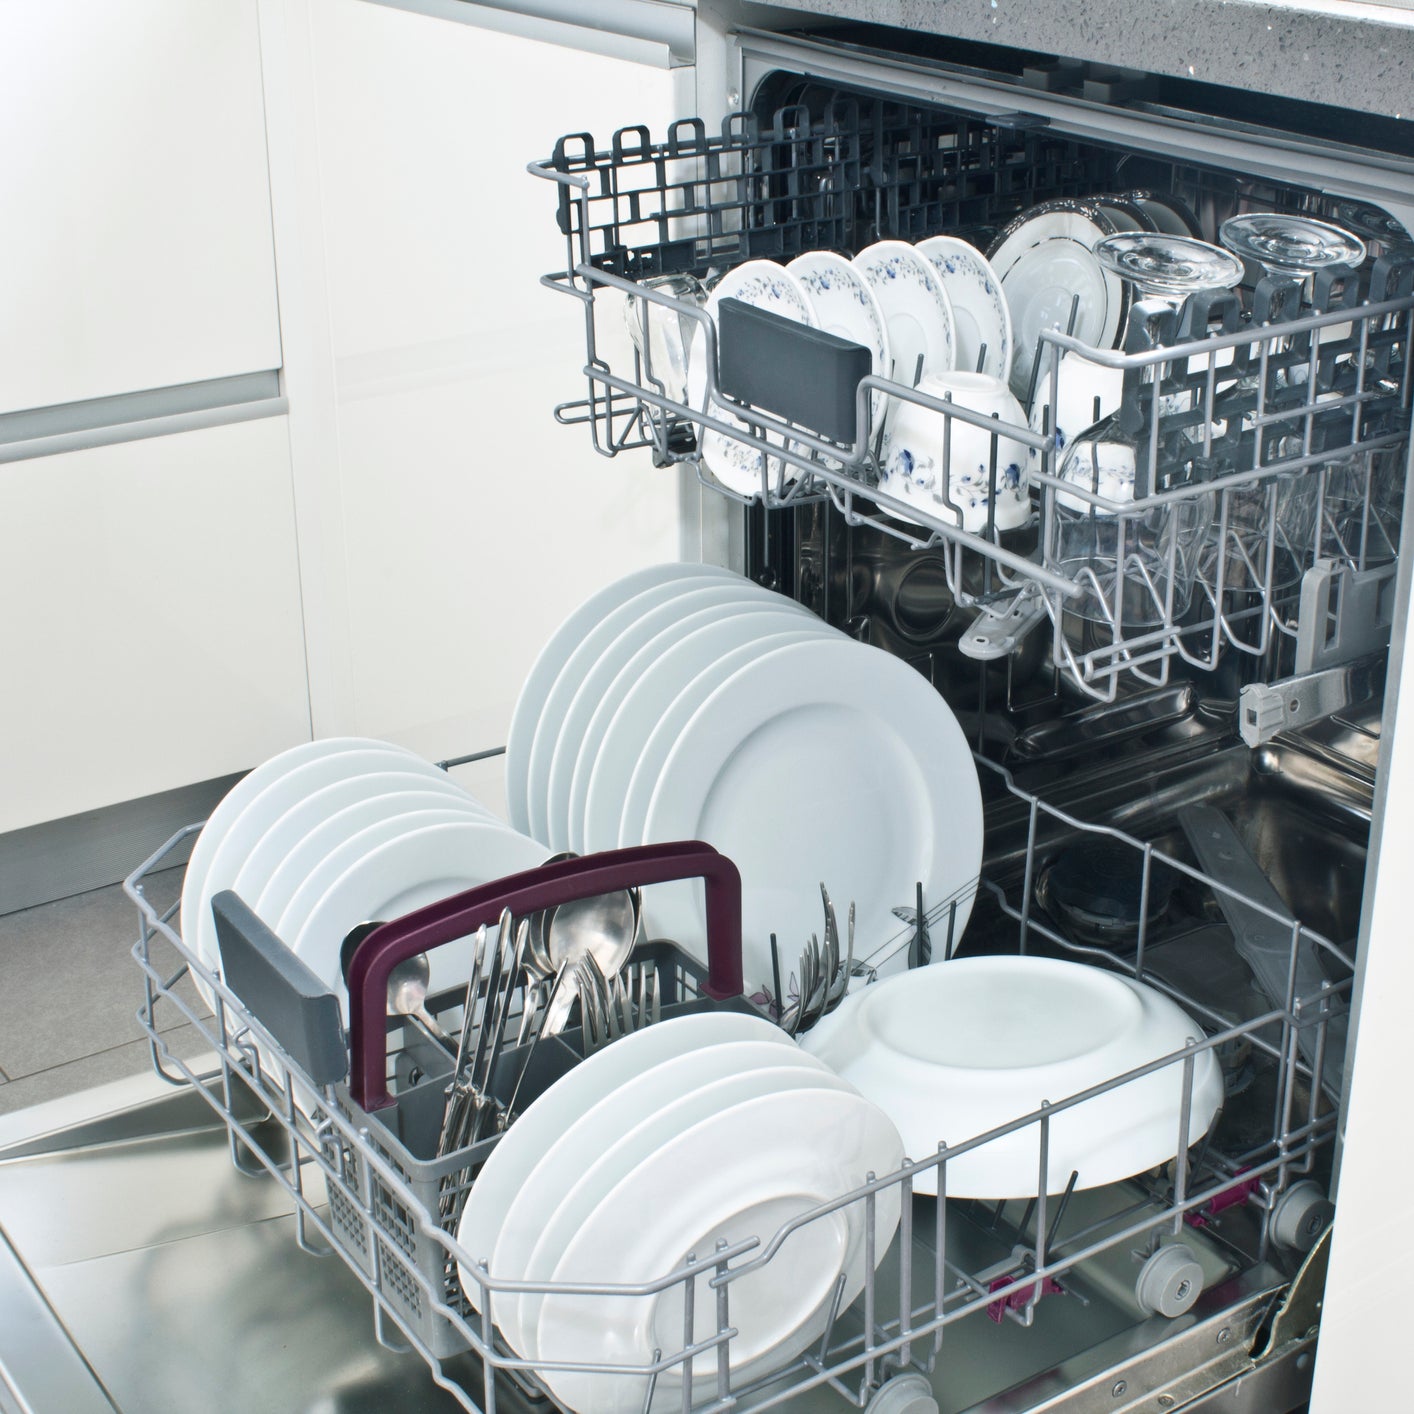 When You Should You Put Salt In A Dishwasher?